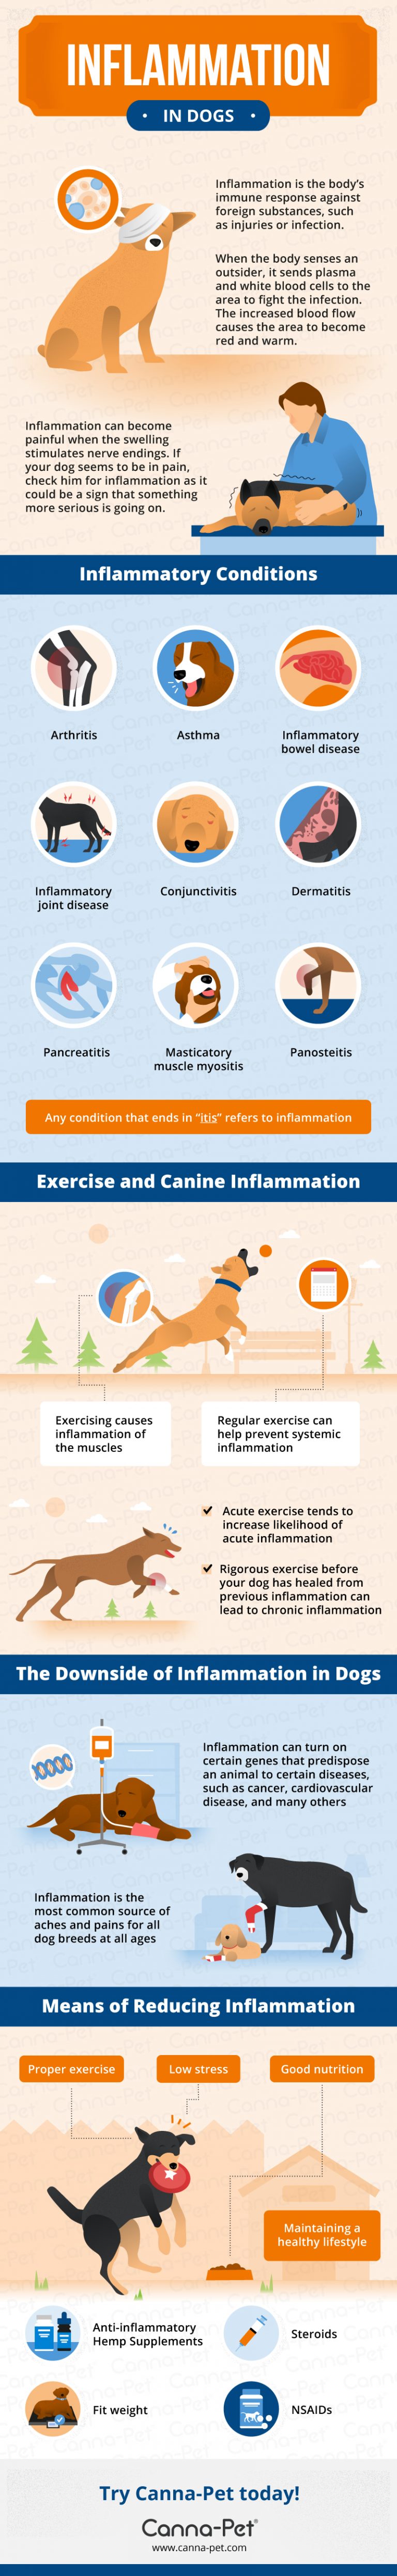 Inflammation in Dogs - Canna-Pet®